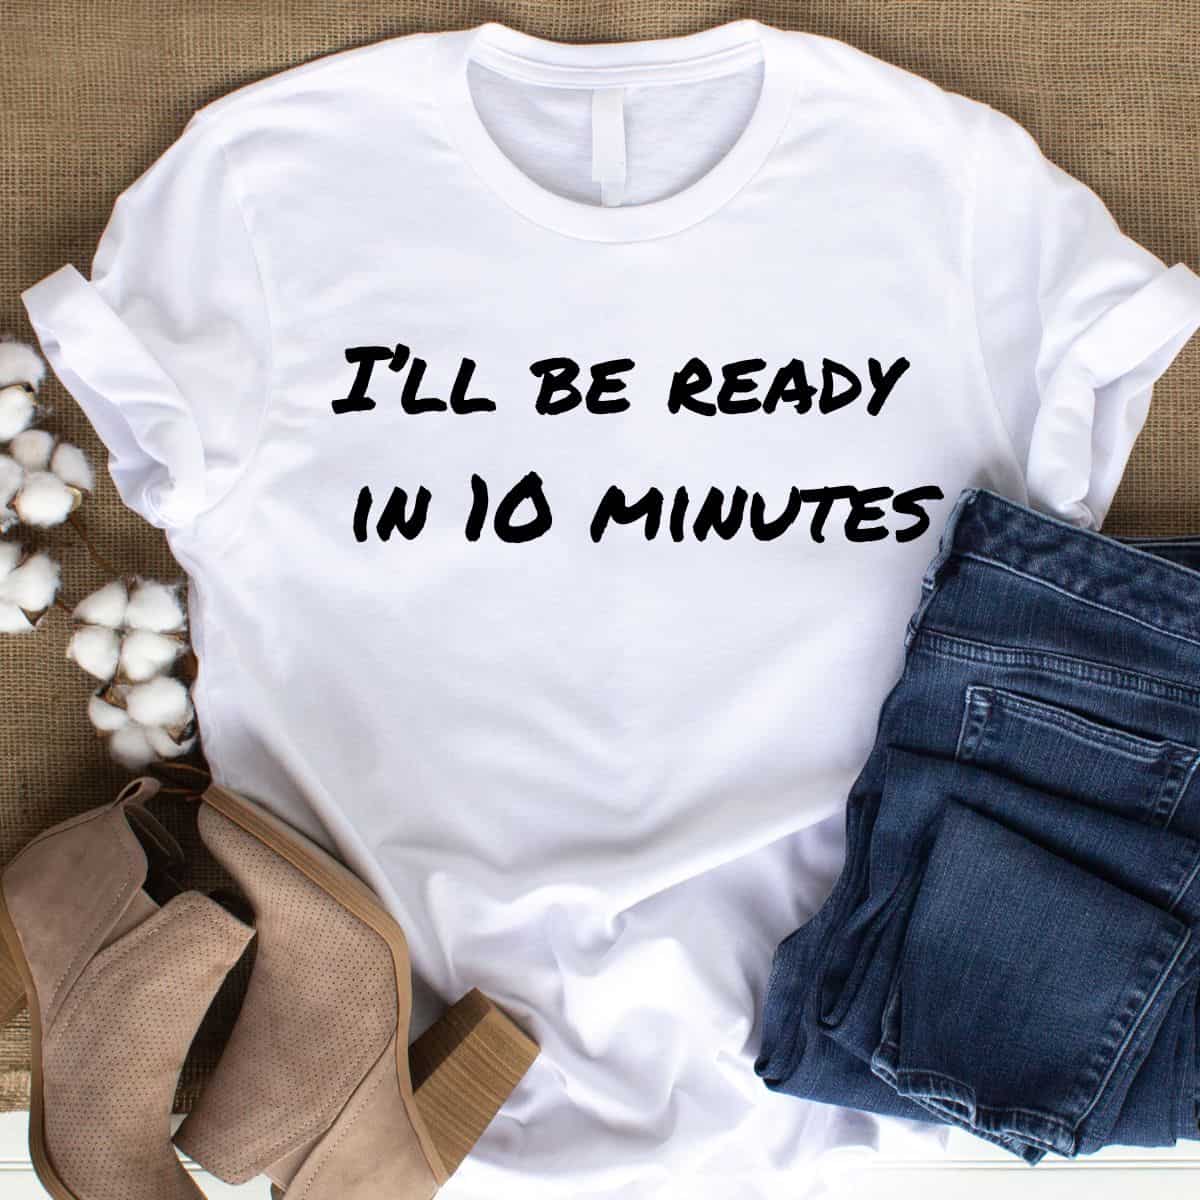 ill be ready in 10 minutes white lies tshirt